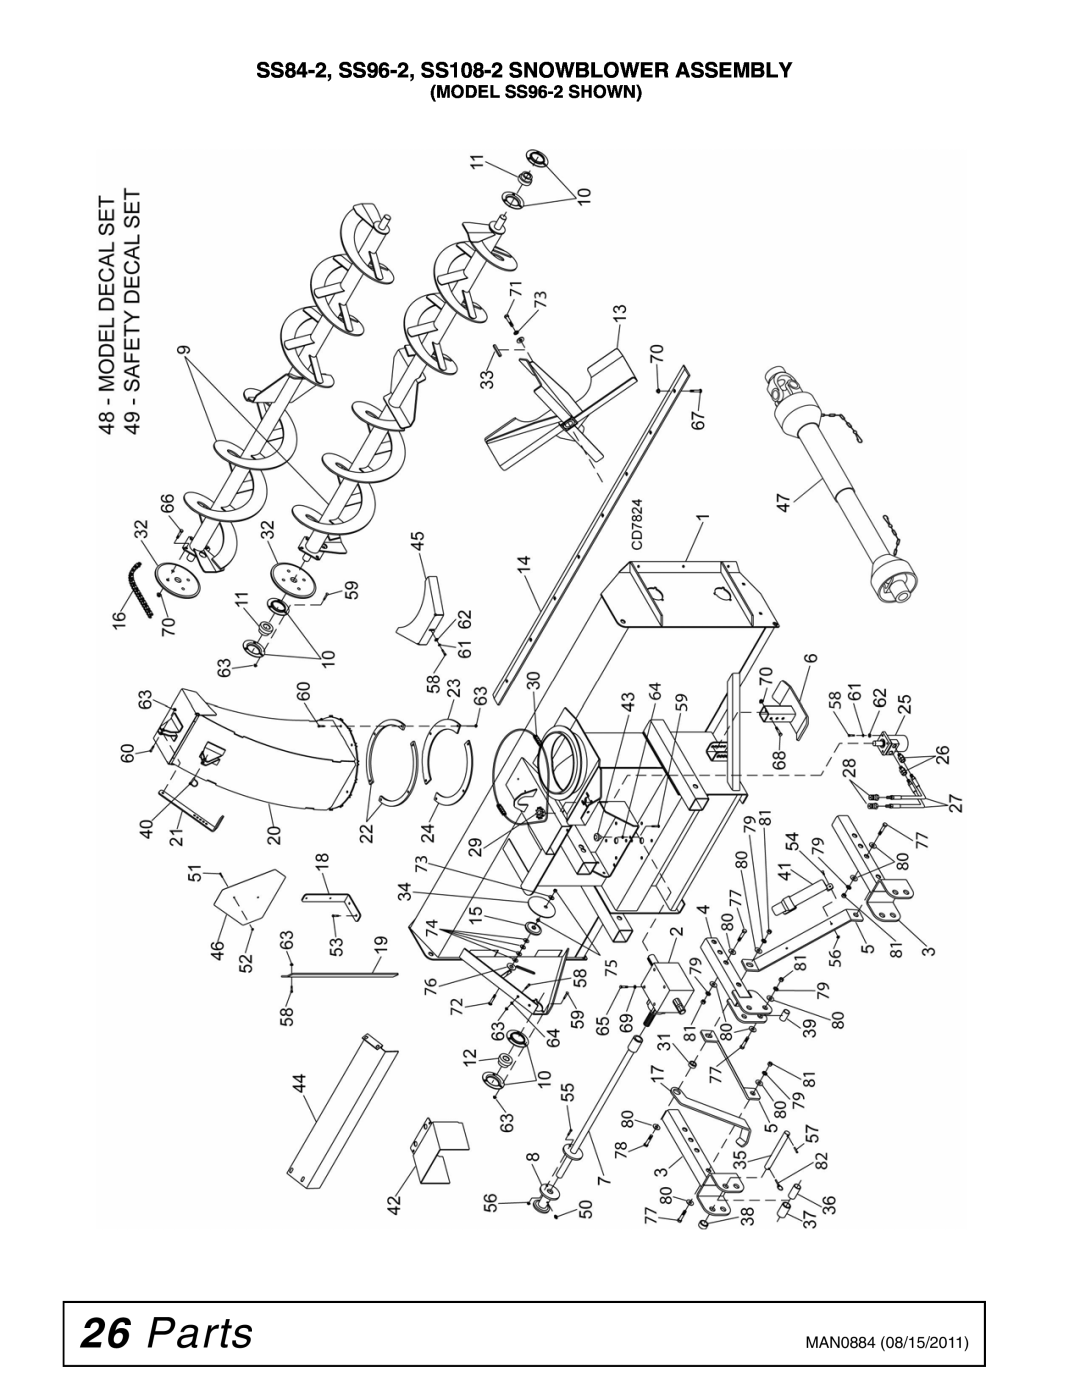 Woods Equipment manual Parts, SS84-2, SS96-2, SS108-2 SNOWBLOWER ASSEMBLY 